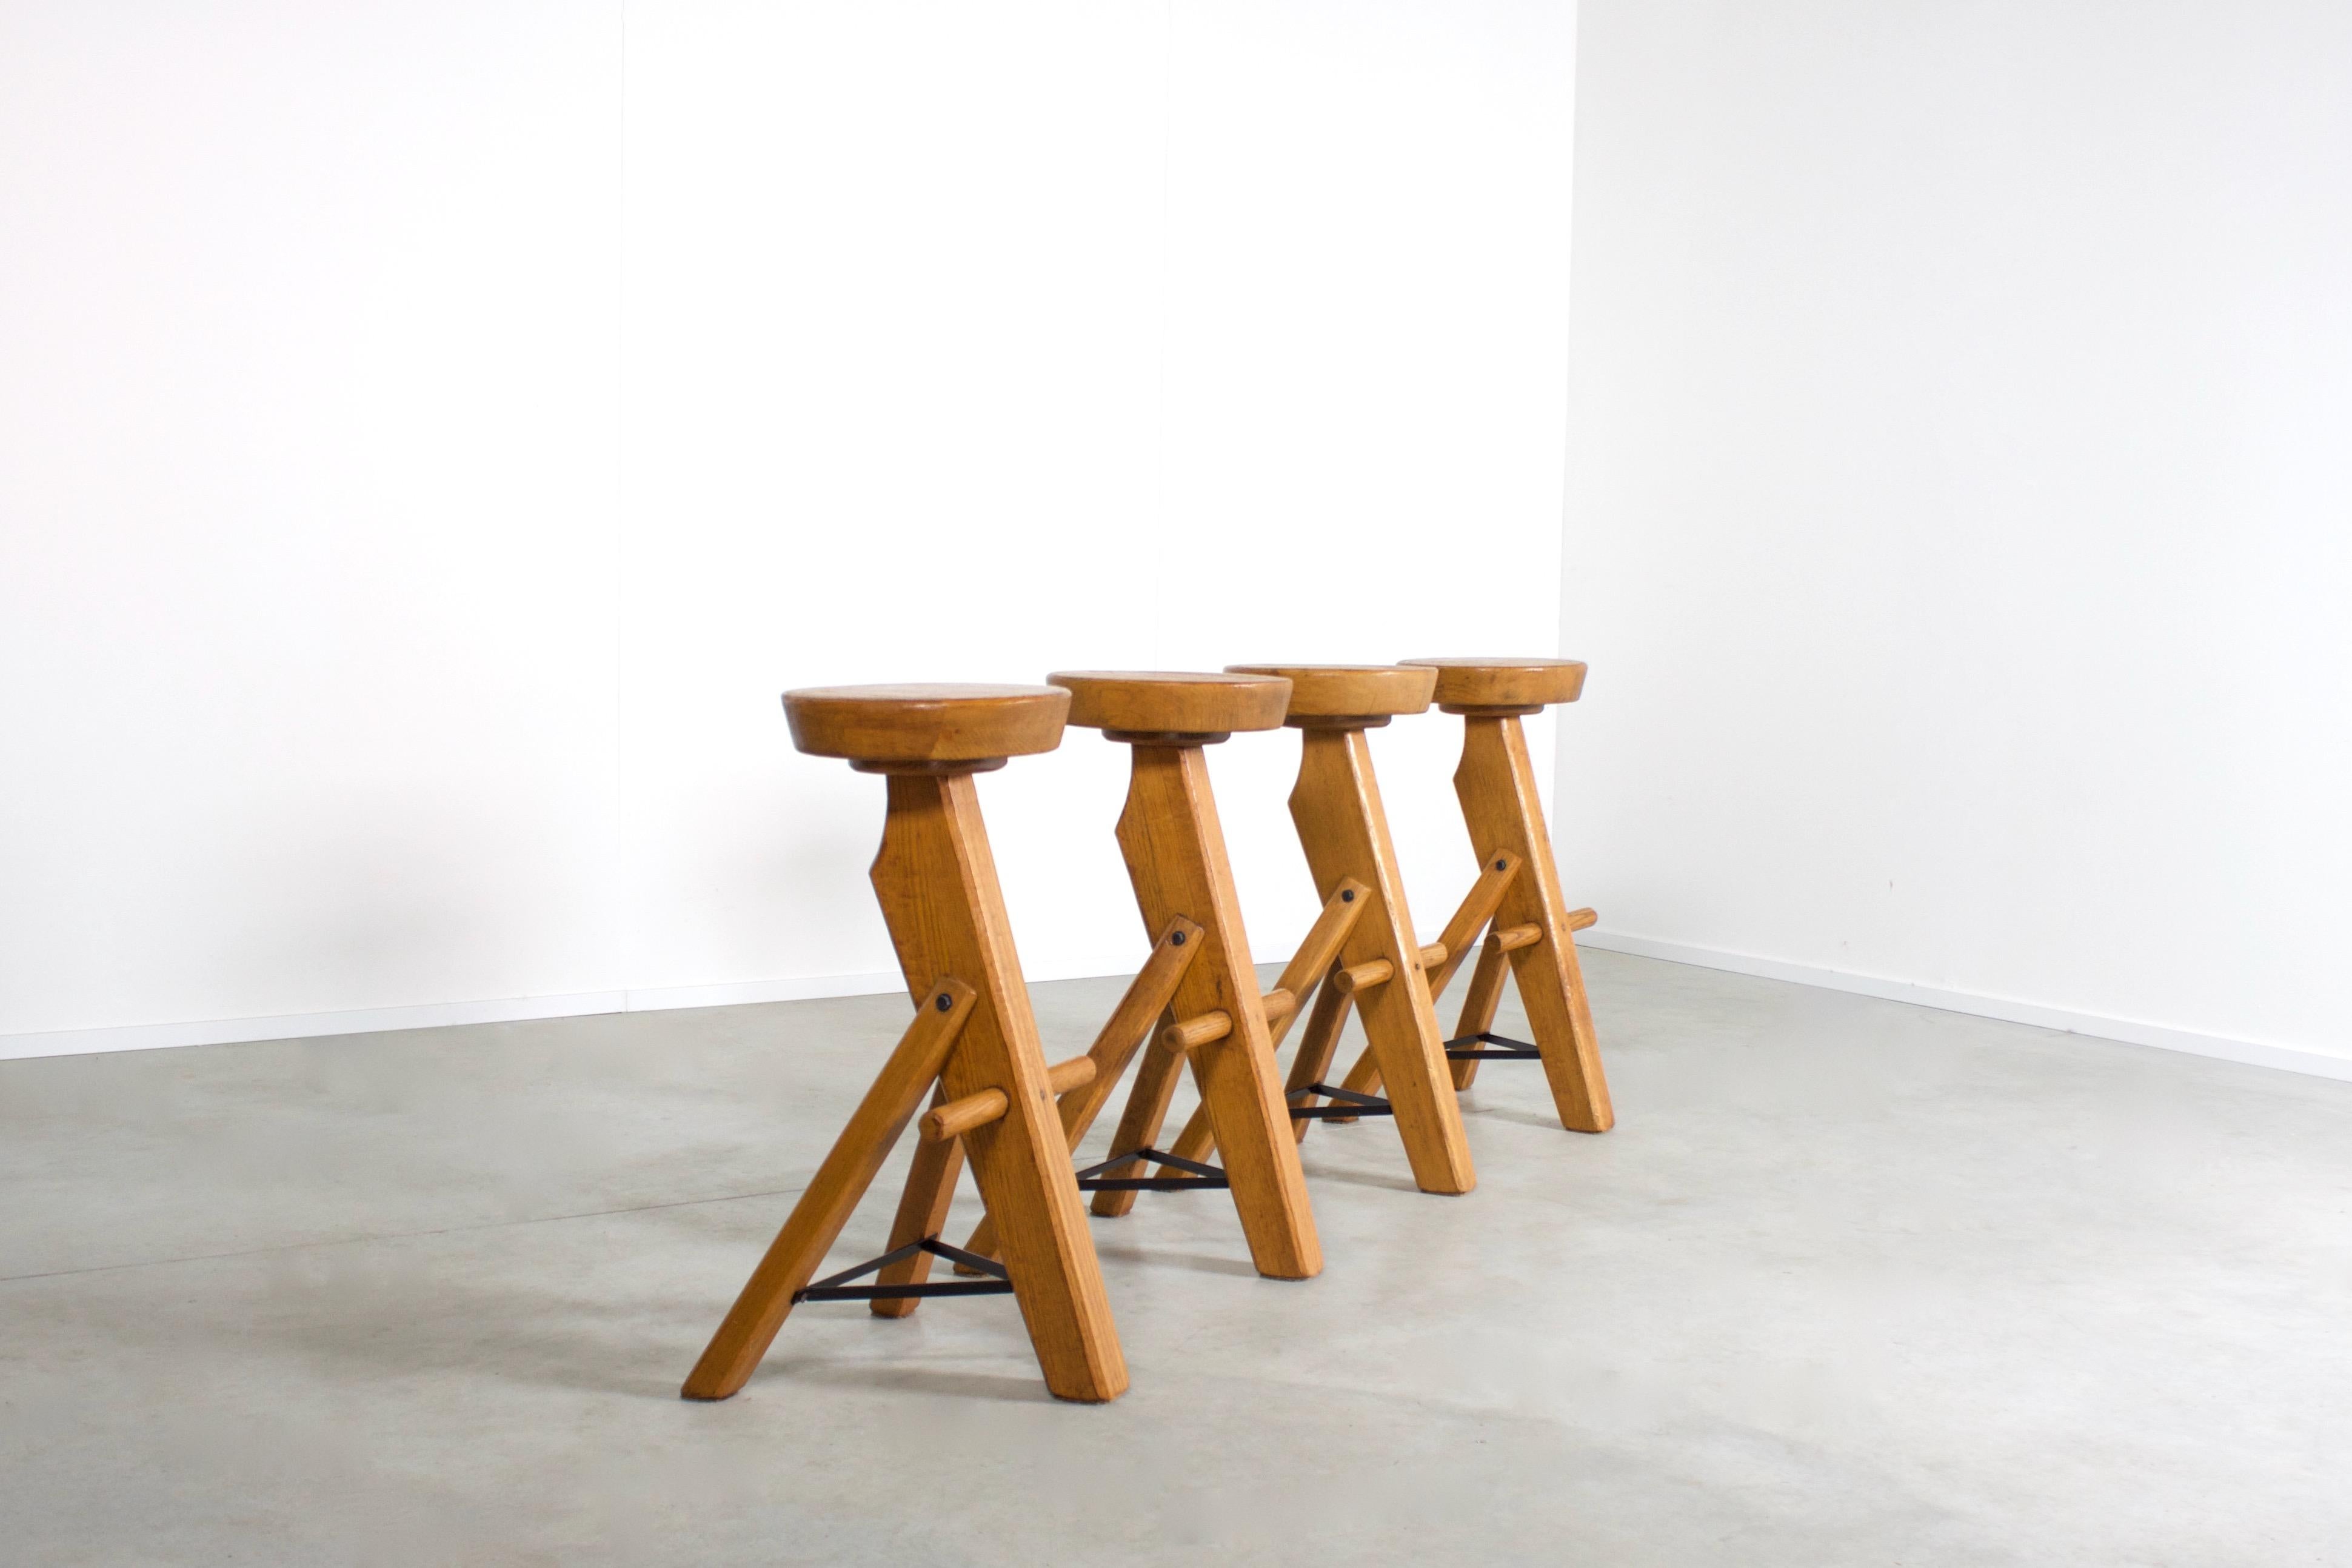 Set of Brutalist bar stools made from solid oak, 1960s

Very impressive Brutalist bar stools in very good condition.

These stools were made in the 1960s

They are made of solid oakwood which ahs a beautiful grain and color.

The round solid oak